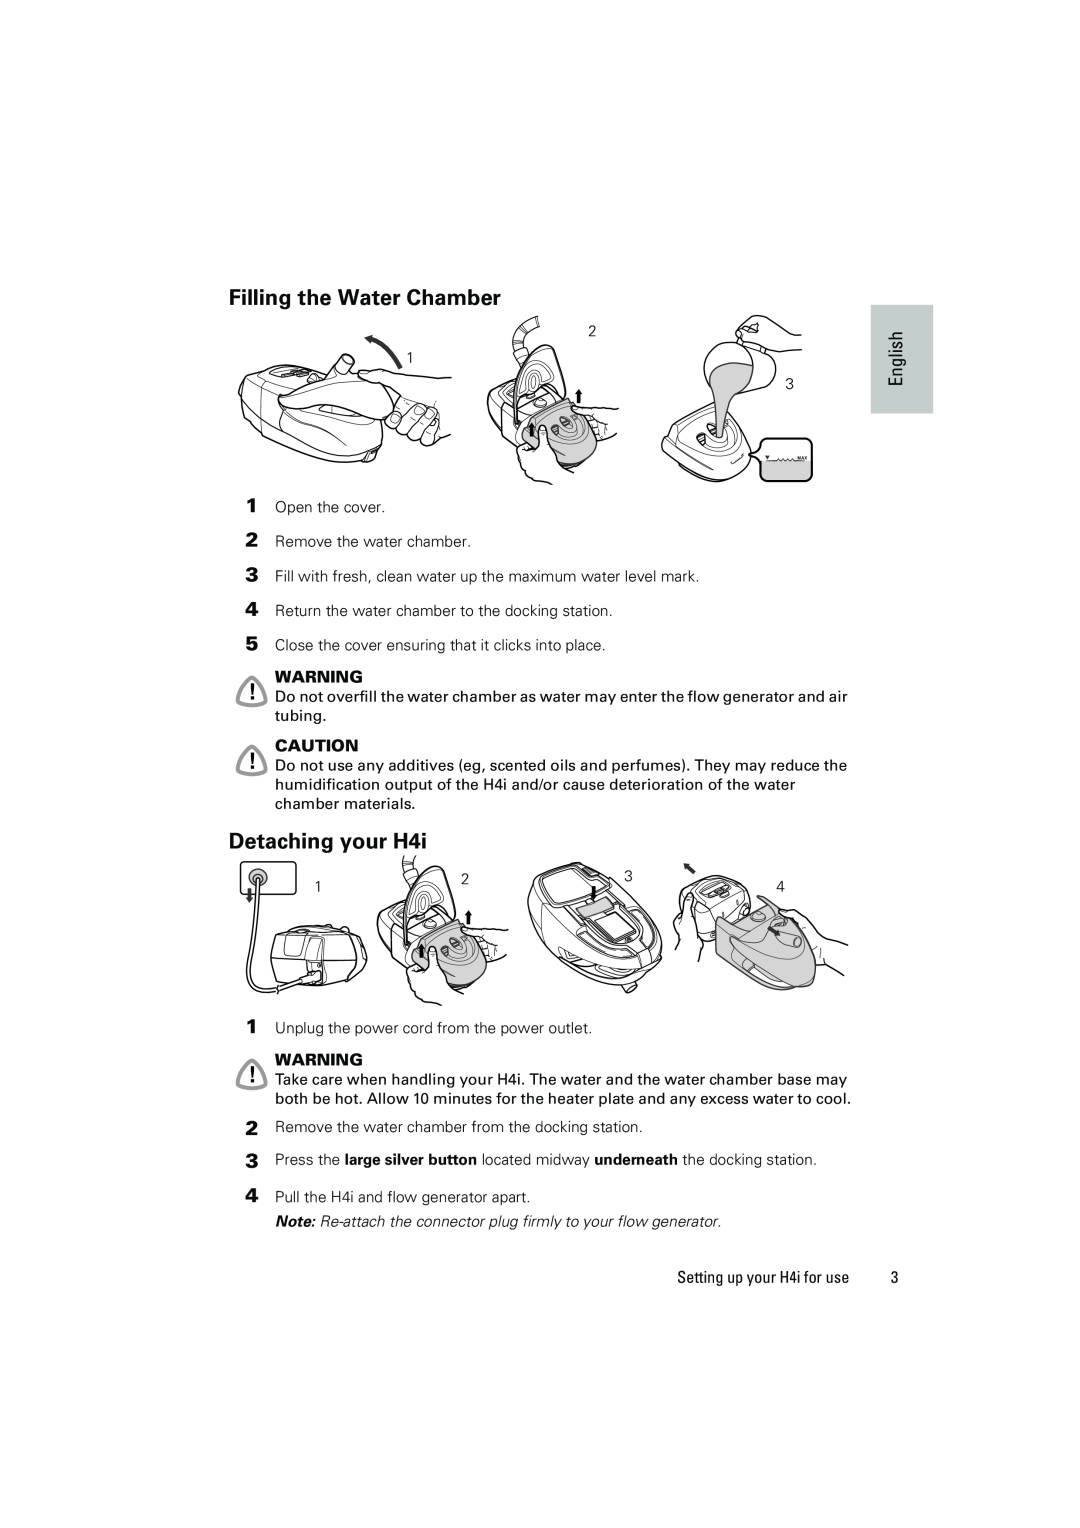 ResMed manual Filling the Water Chamber, Detaching your H4i, English 